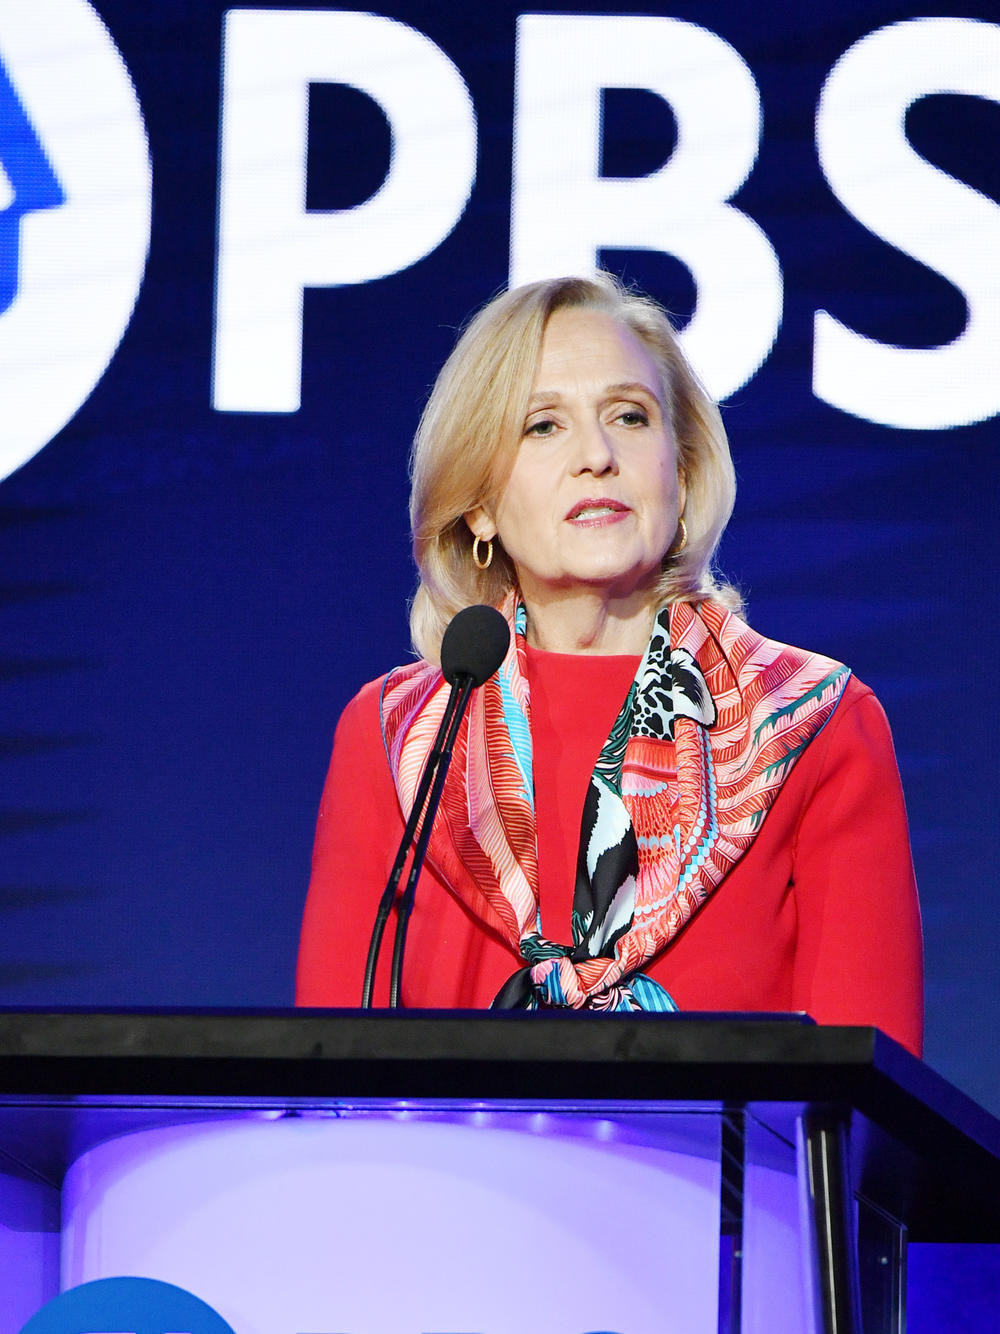 PBS President and CEO Paula Kerger speaks during the 2020 Winter TCA Press Tour in Pasadena, Calif.